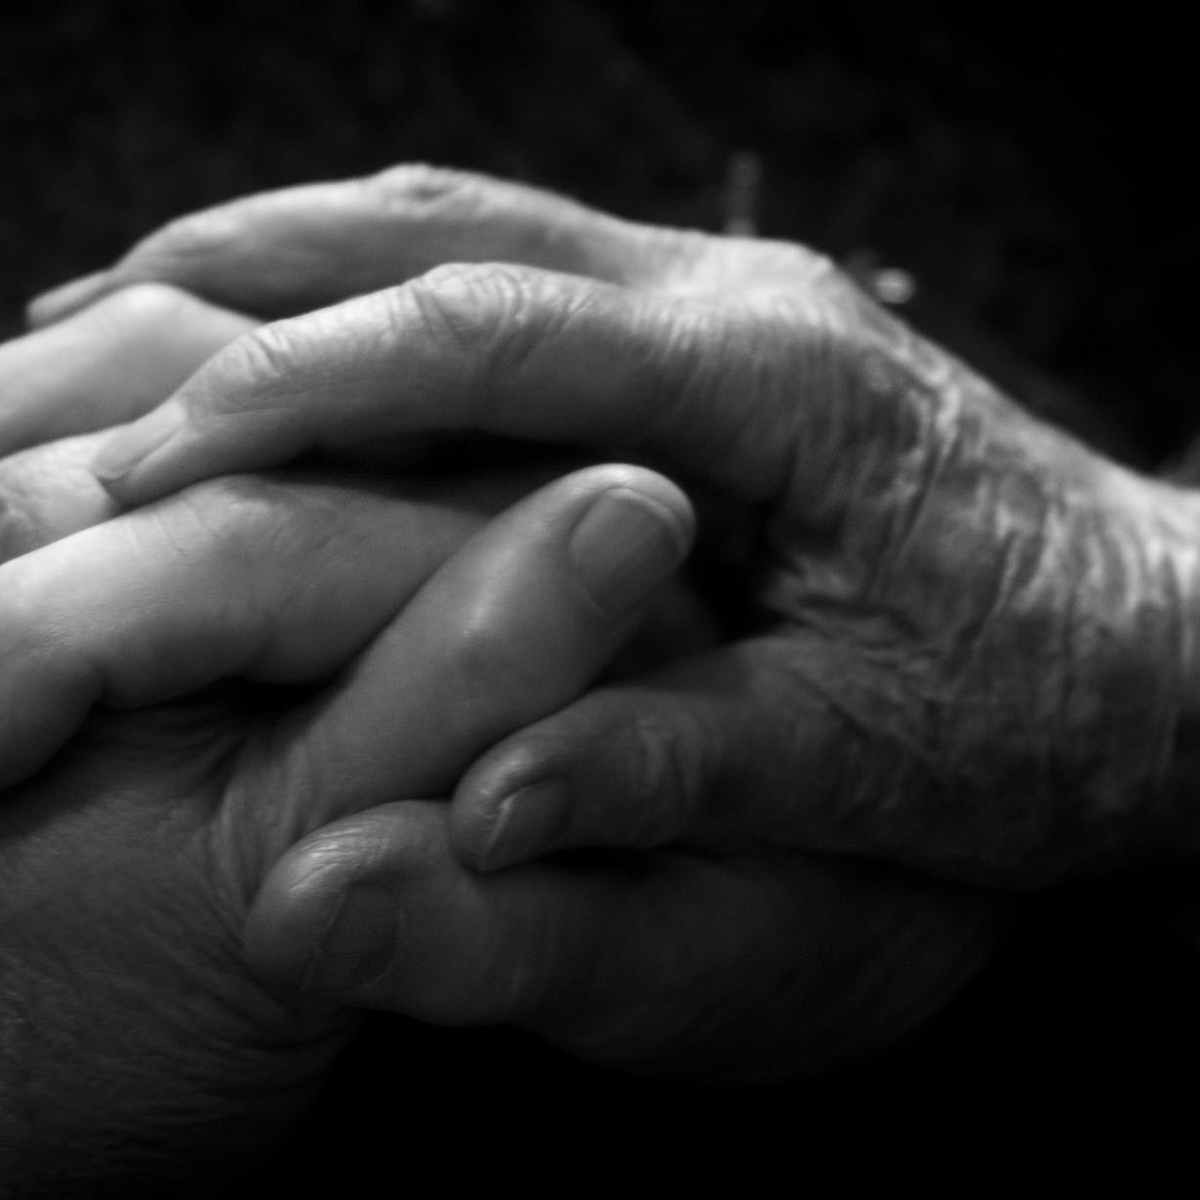 Caregiving For Others and Yourself